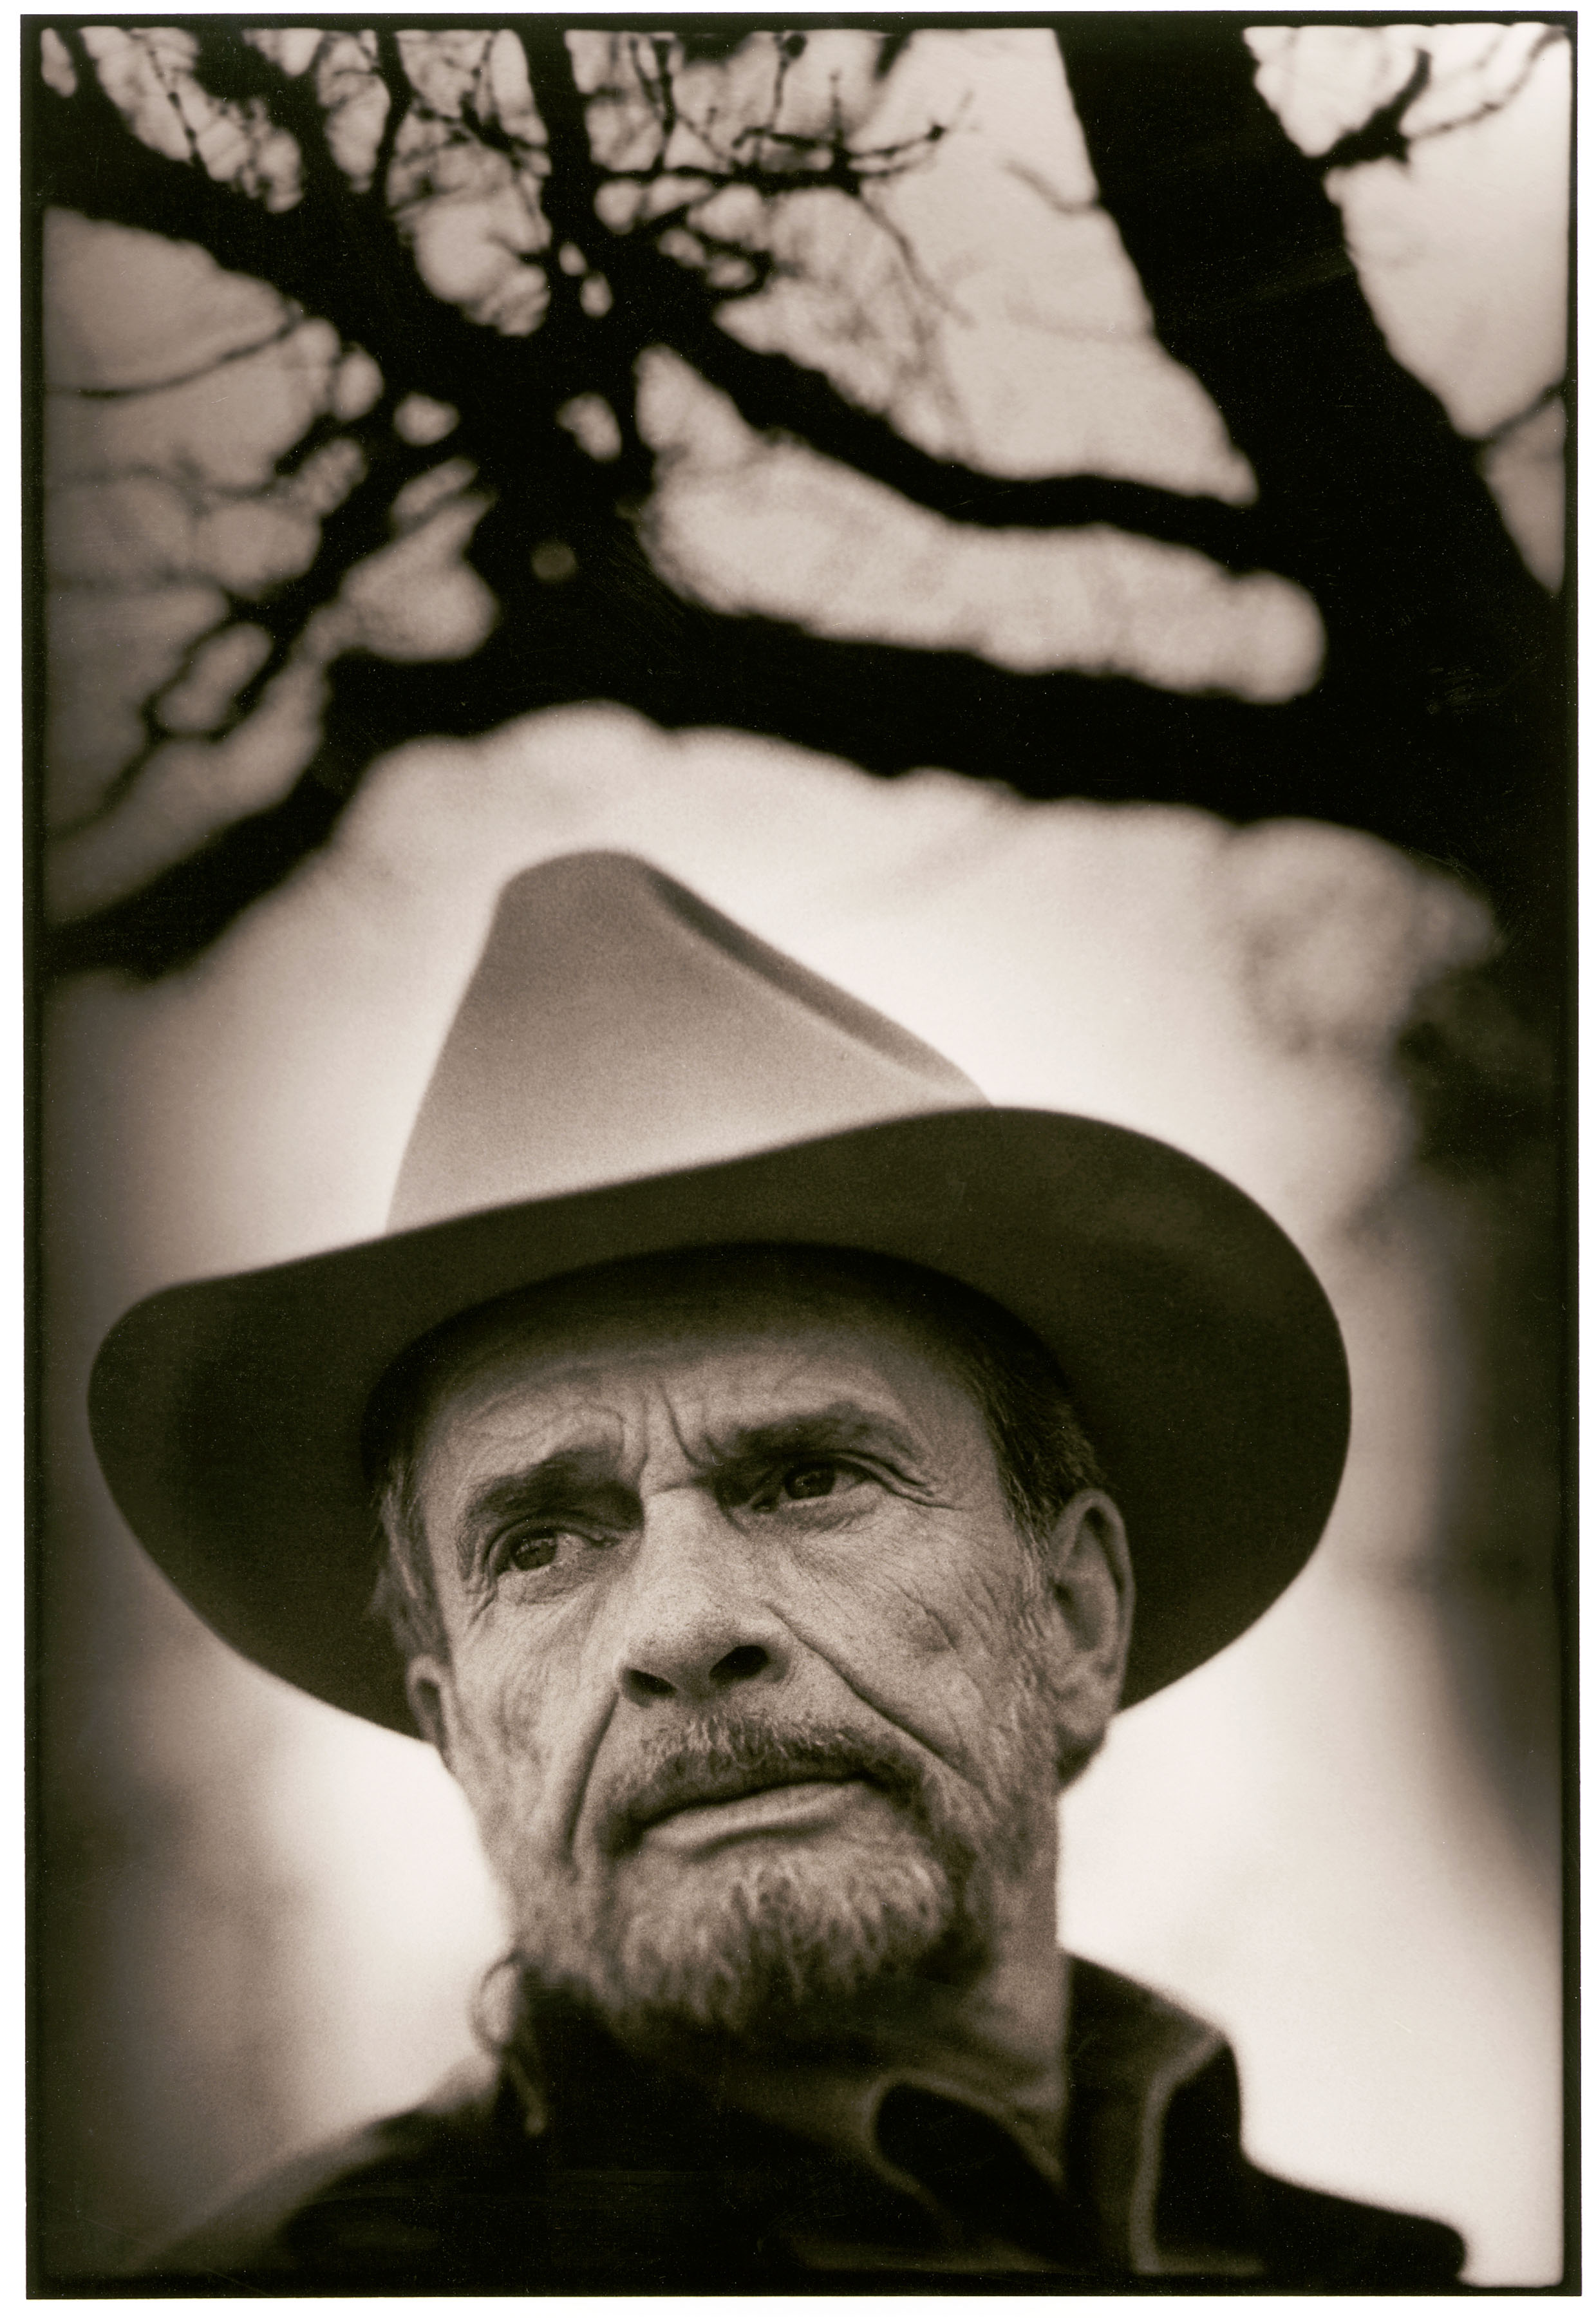 Merle Haggard, Country Music Legend